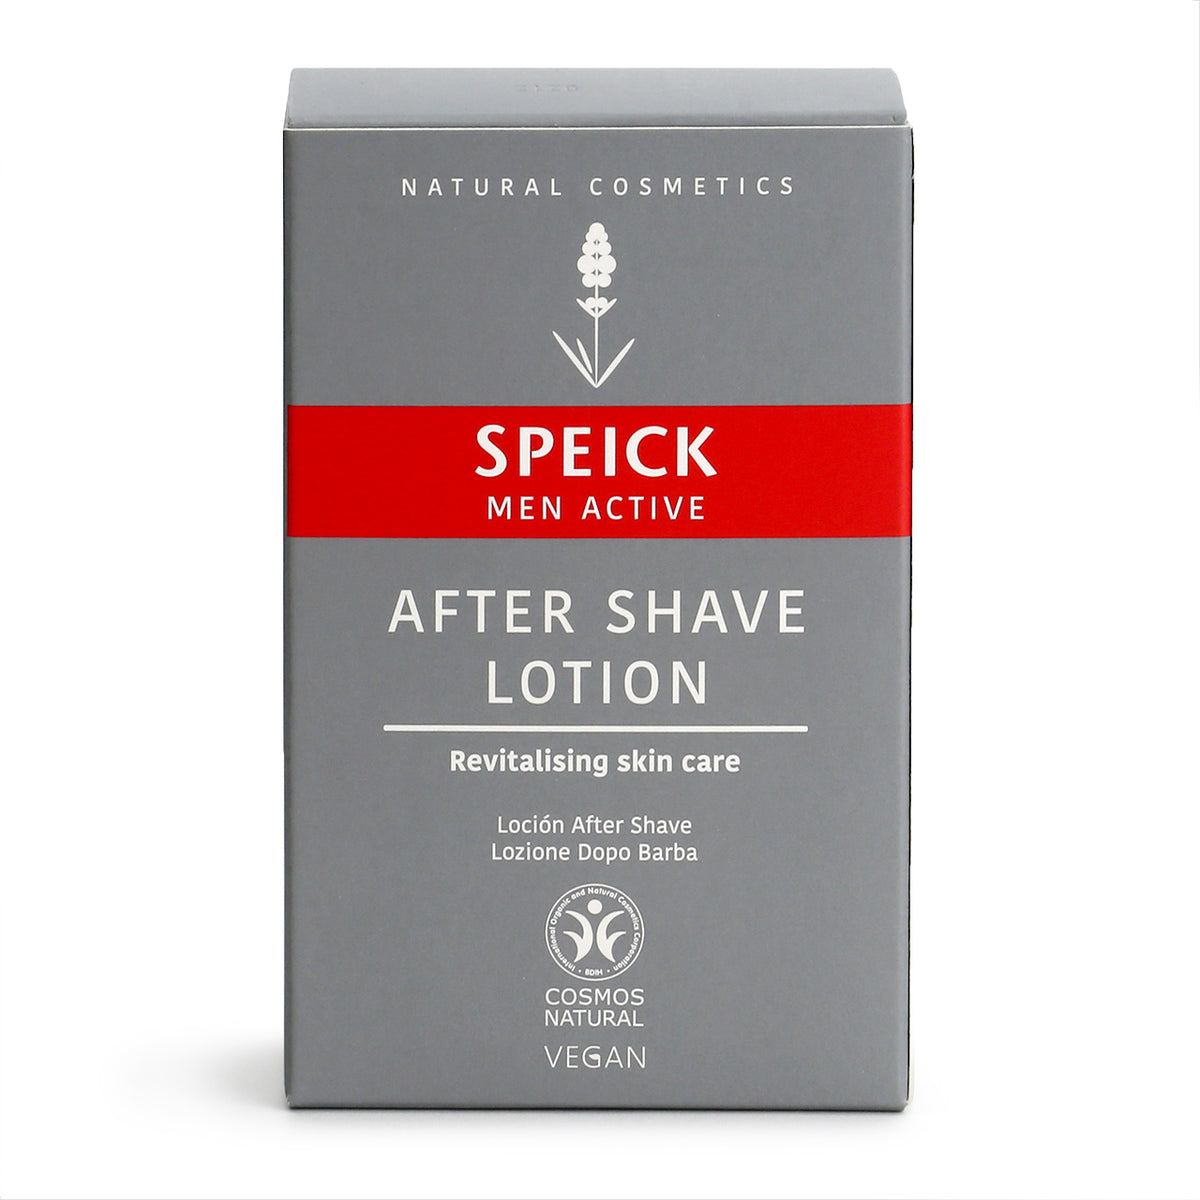 Speick Men Active After Shave Lotion box is mainly grey with a red encircling stripe under the white logo